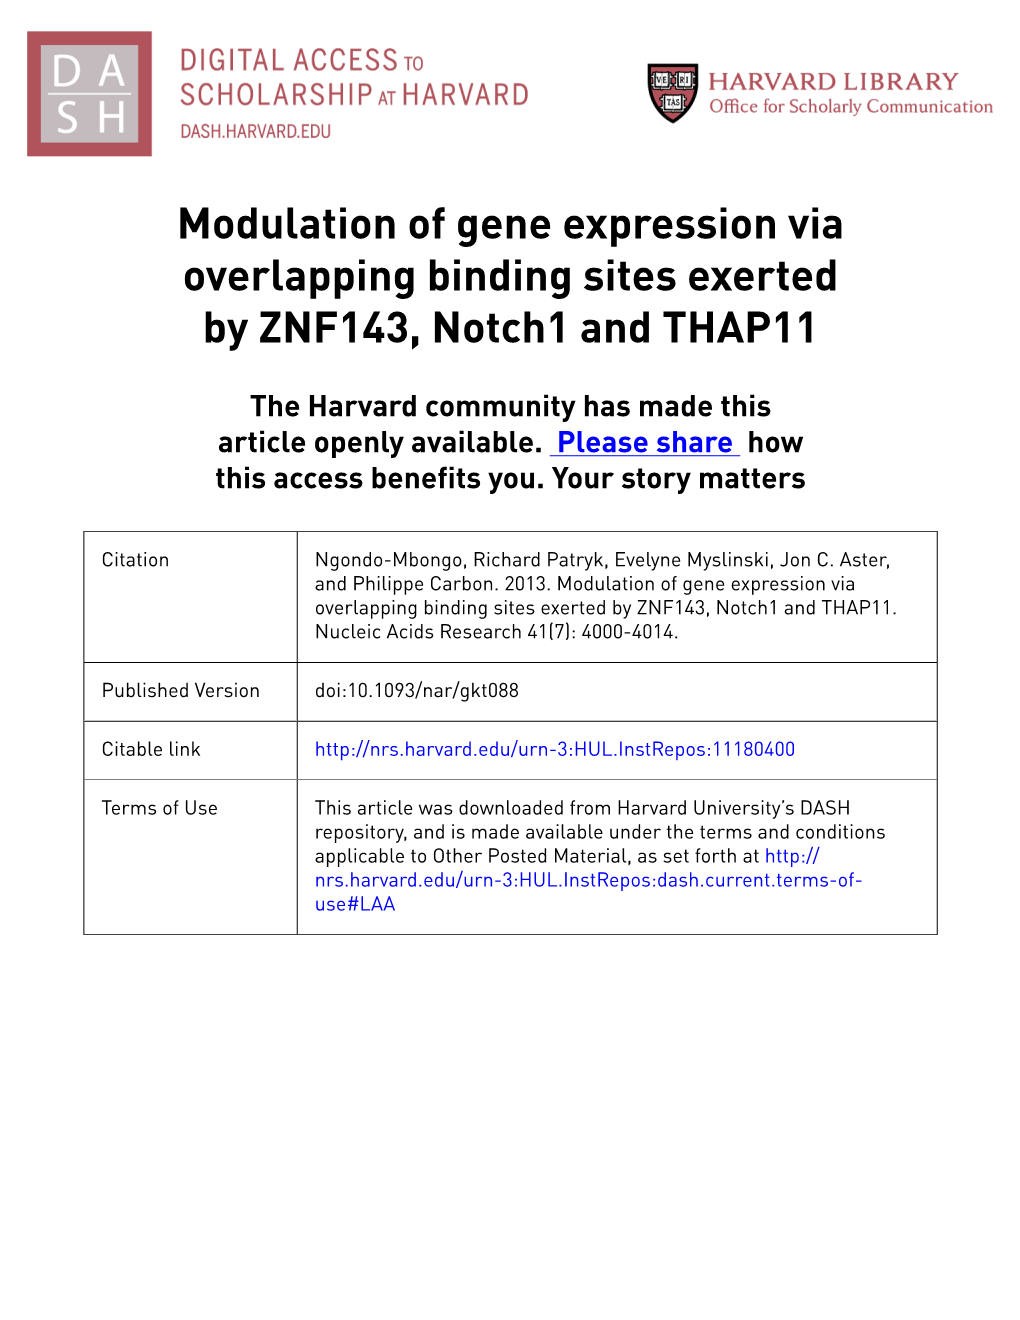 Modulation of Gene Expression Via Overlapping Binding Sites Exerted by ZNF143, Notch1 and THAP11